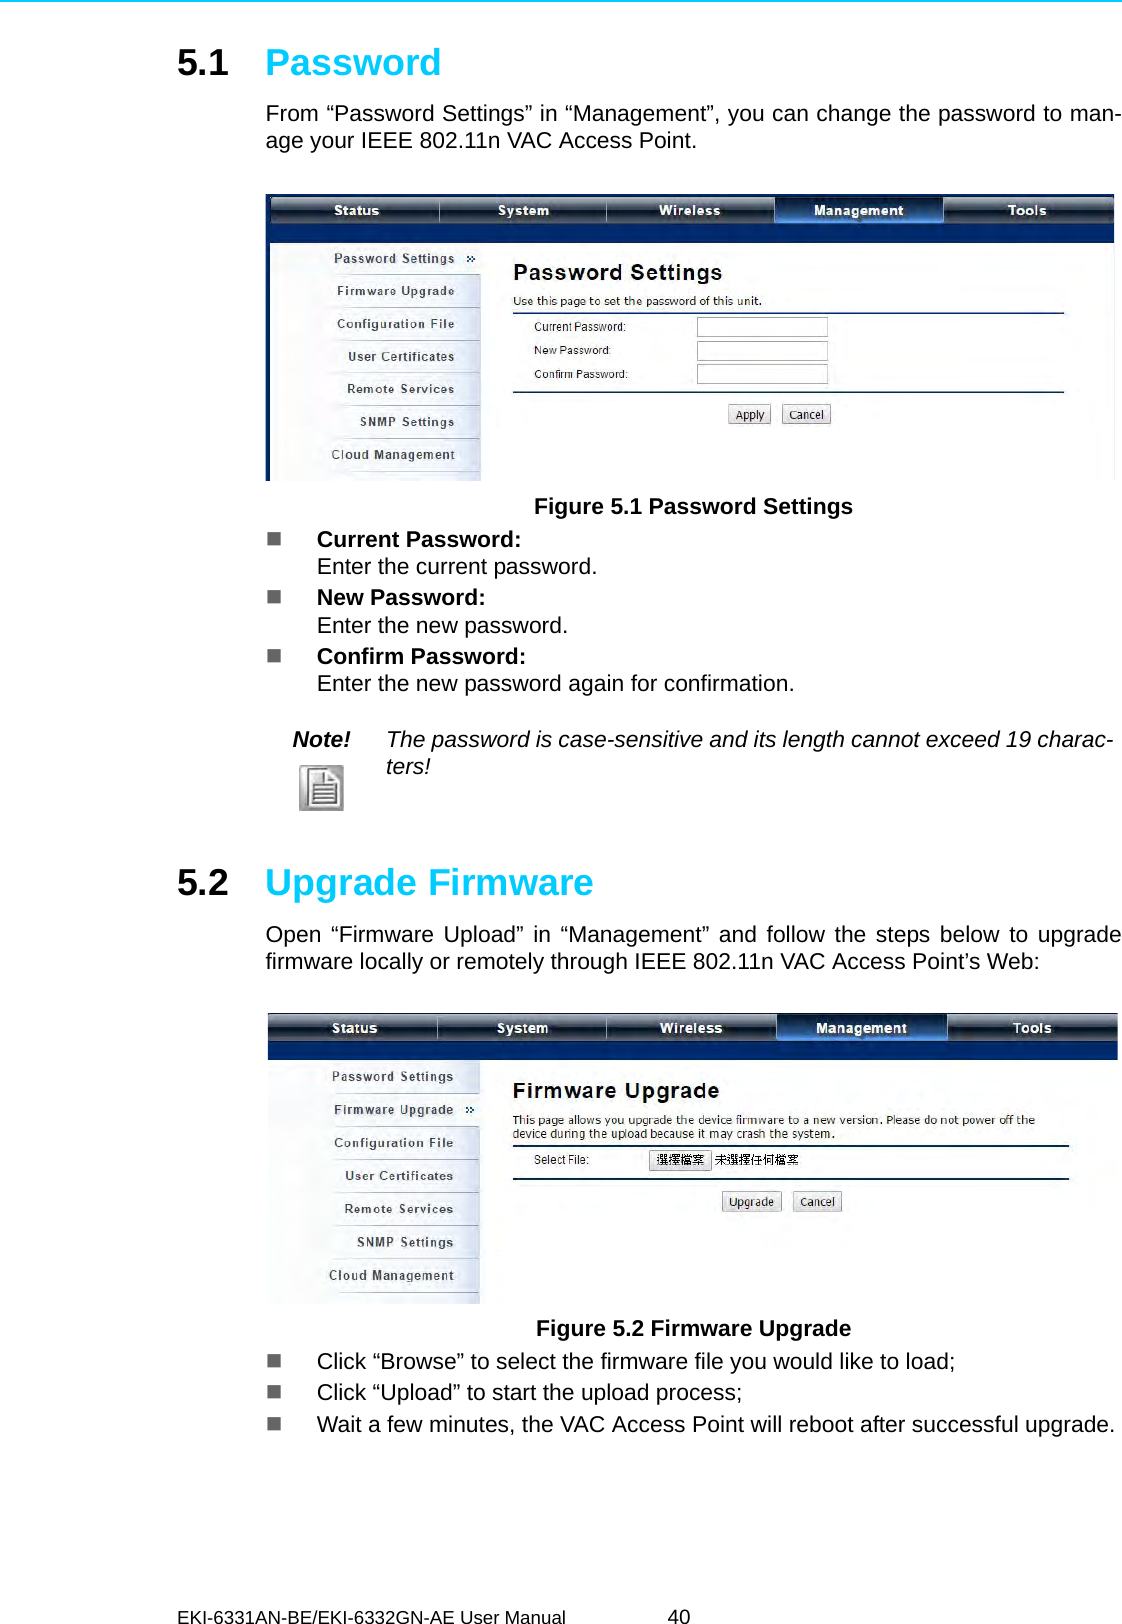 EKI-6331AN-BE/EKI-6332GN-AE User Manual 405.1 PasswordFrom “Password Settings” in “Management”, you can change the password to man-age your IEEE 802.11n VAC Access Point. Figure 5.1 Password SettingsCurrent Password: Enter the current password.New Password: Enter the new password.Confirm Password: Enter the new password again for confirmation.5.2 Upgrade FirmwareOpen “Firmware Upload” in “Management” and follow the steps below to upgradefirmware locally or remotely through IEEE 802.11n VAC Access Point’s Web: Figure 5.2 Firmware UpgradeClick “Browse” to select the firmware file you would like to load;Click “Upload” to start the upload process;Wait a few minutes, the VAC Access Point will reboot after successful upgrade.Note! The password is case-sensitive and its length cannot exceed 19 charac-ters!